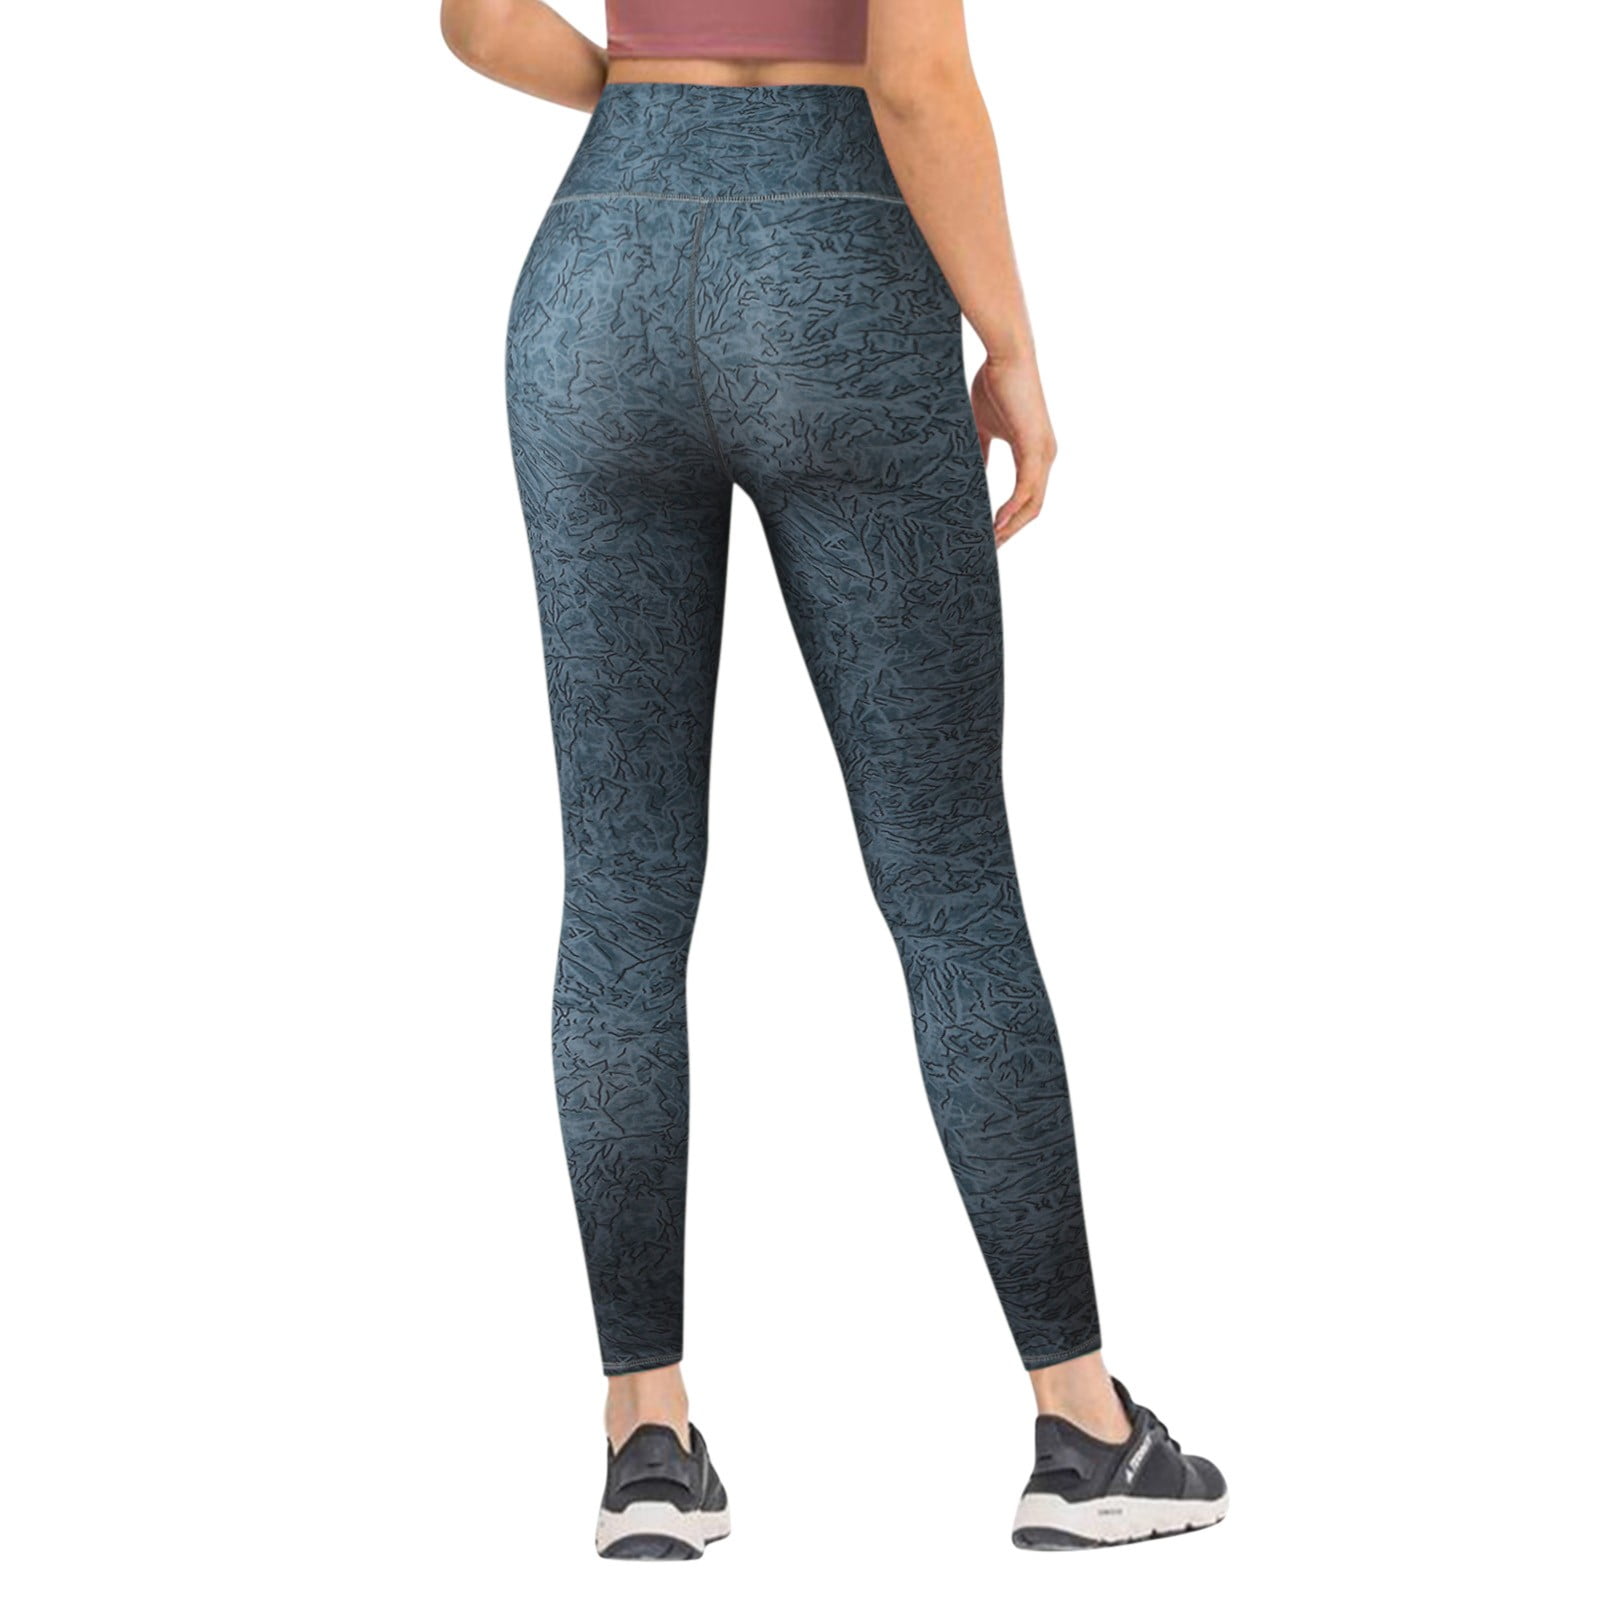 Capri Leggings With Pockets for Women Printed Fitness Compression